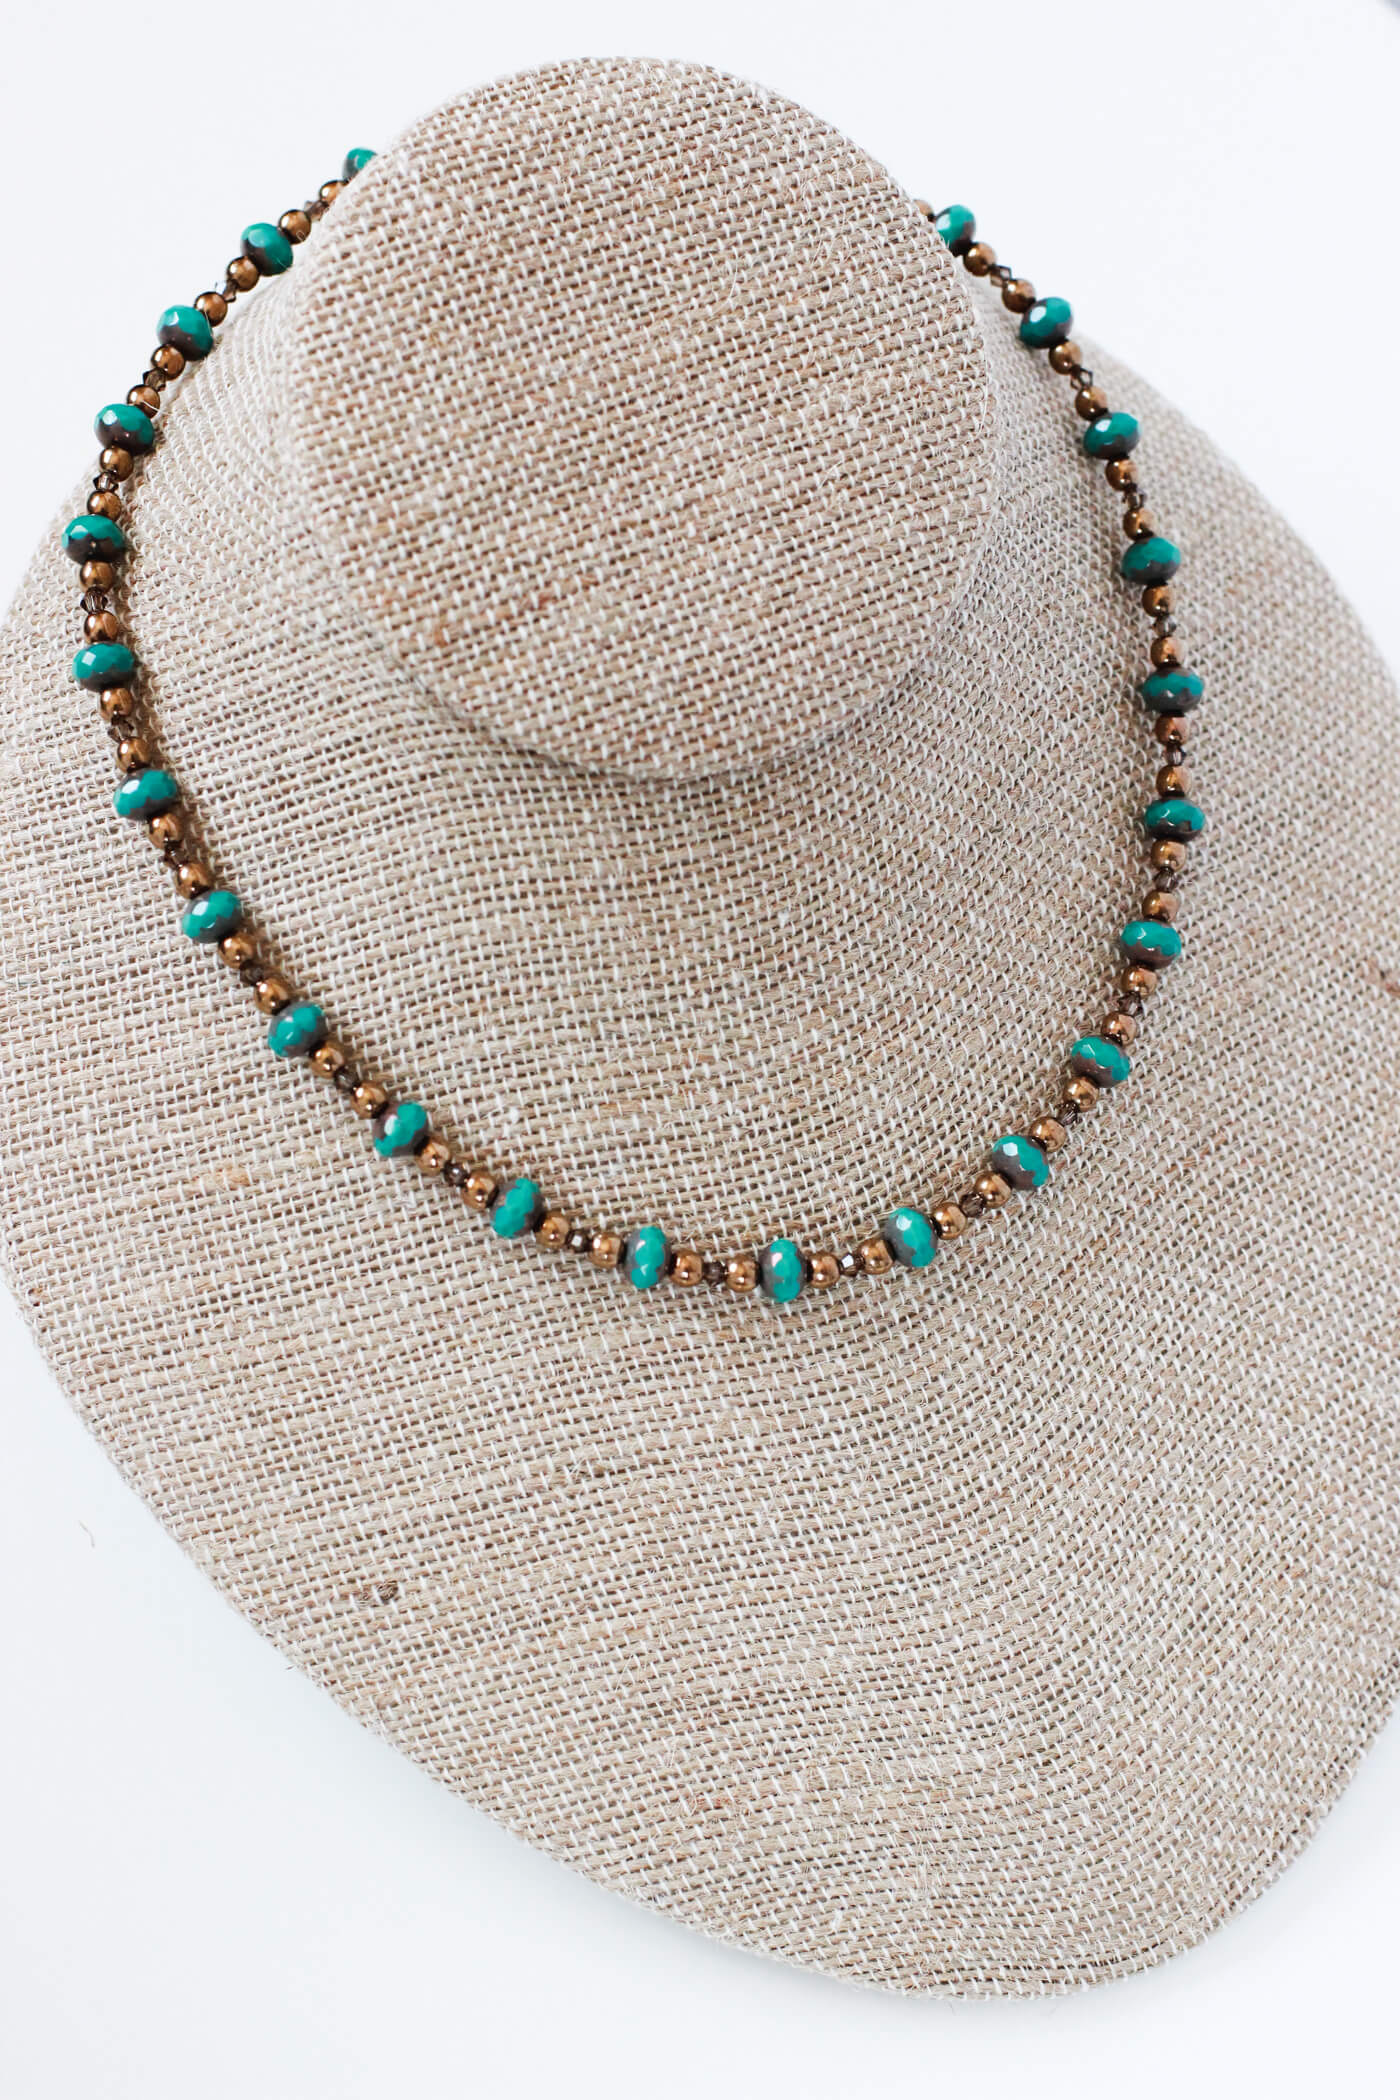 Fall Necklace - Designer Beaded Jewelry by Kaleidoscopes And Polka Dots